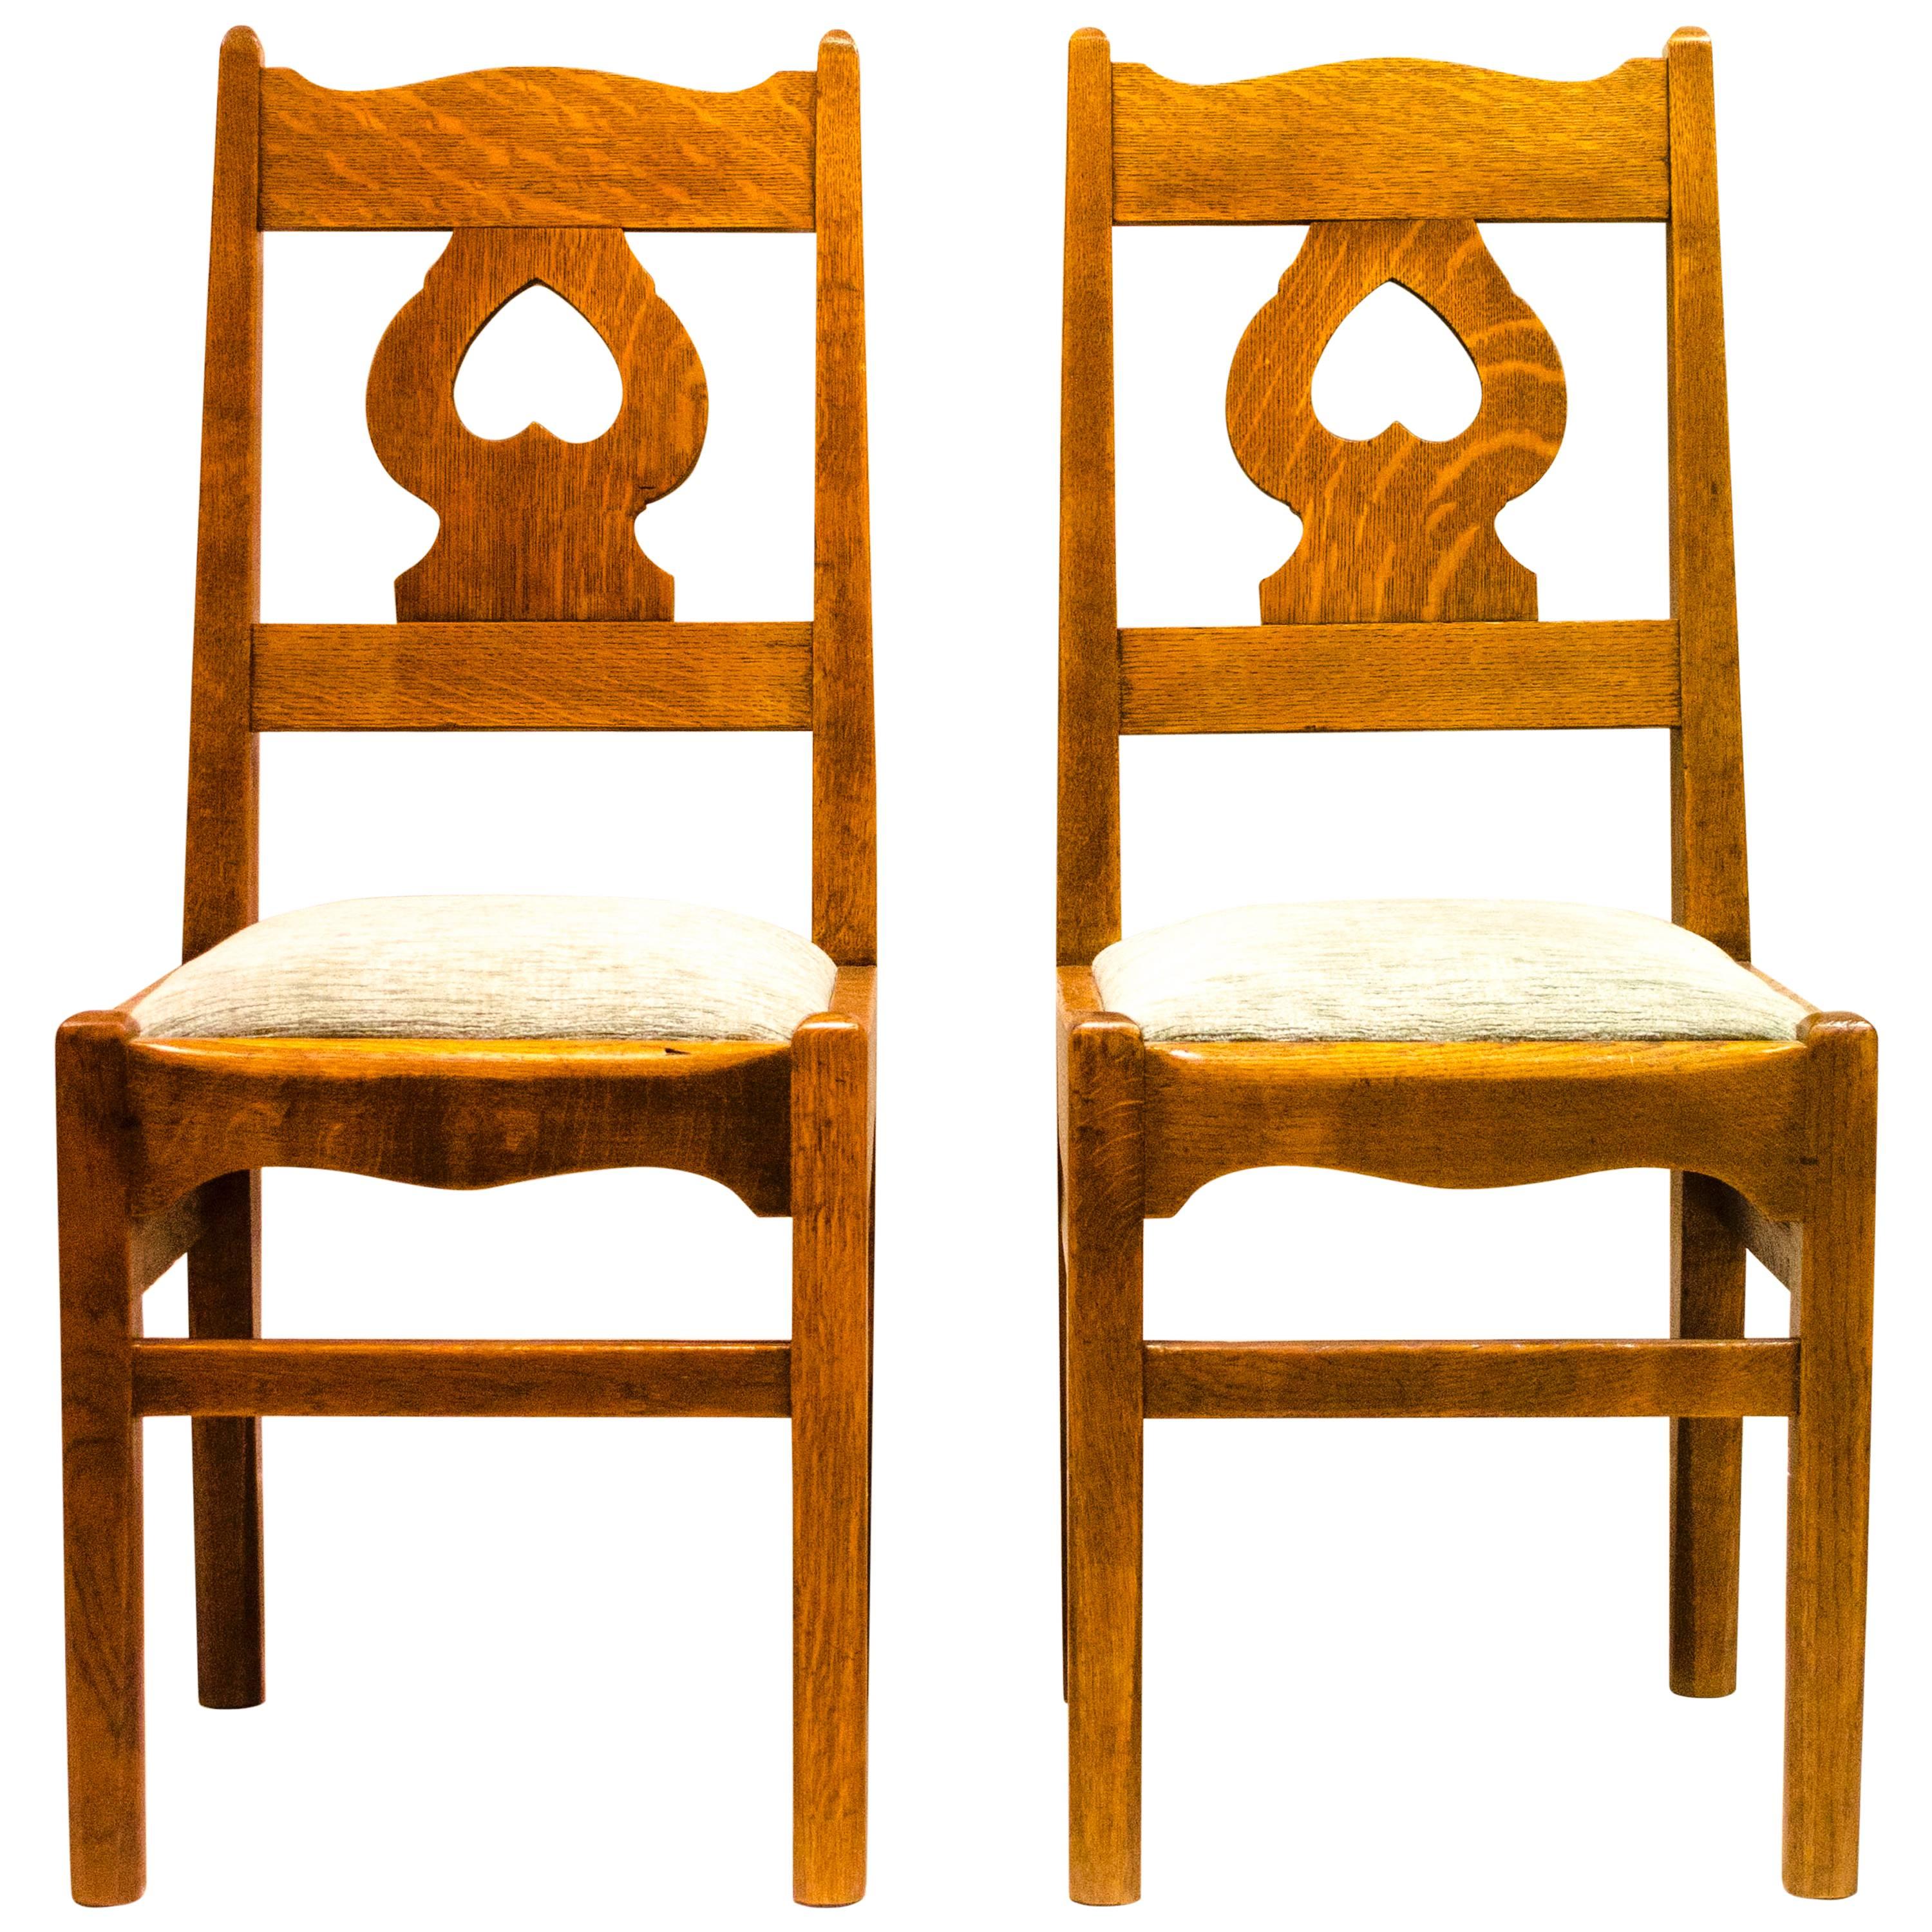 A Rare Pair of Arts & Crafts Oak Chairs by C F A Voysey